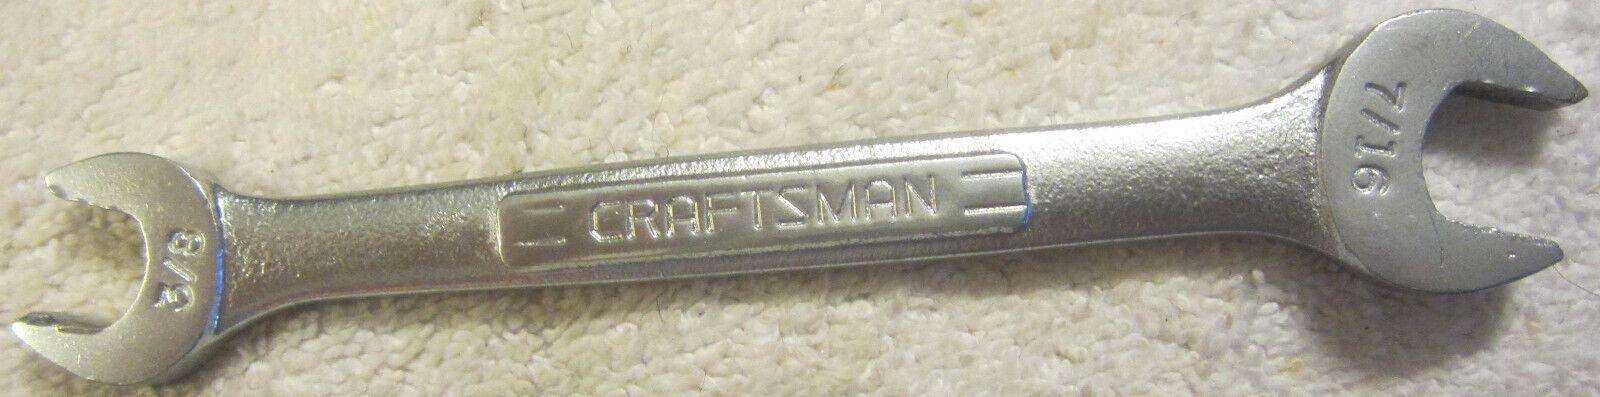 1 Craftsman USA Open-End Wrench 3/8\